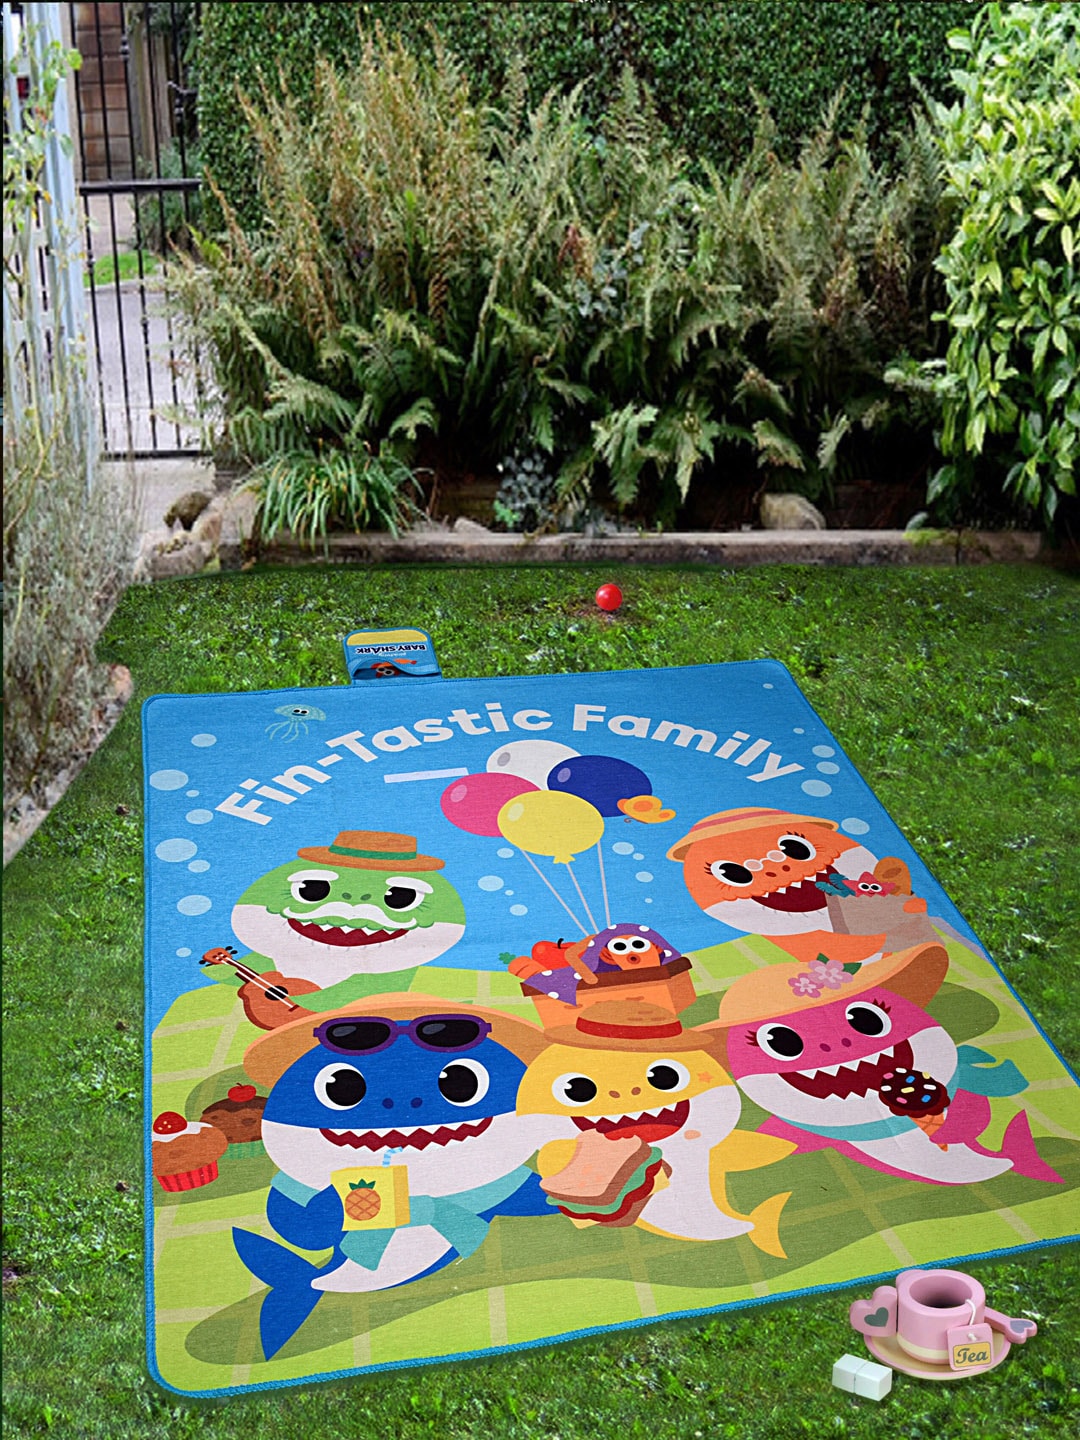 Saral Home Blue Printed Rectangular Picnic Floor Mats Price in India